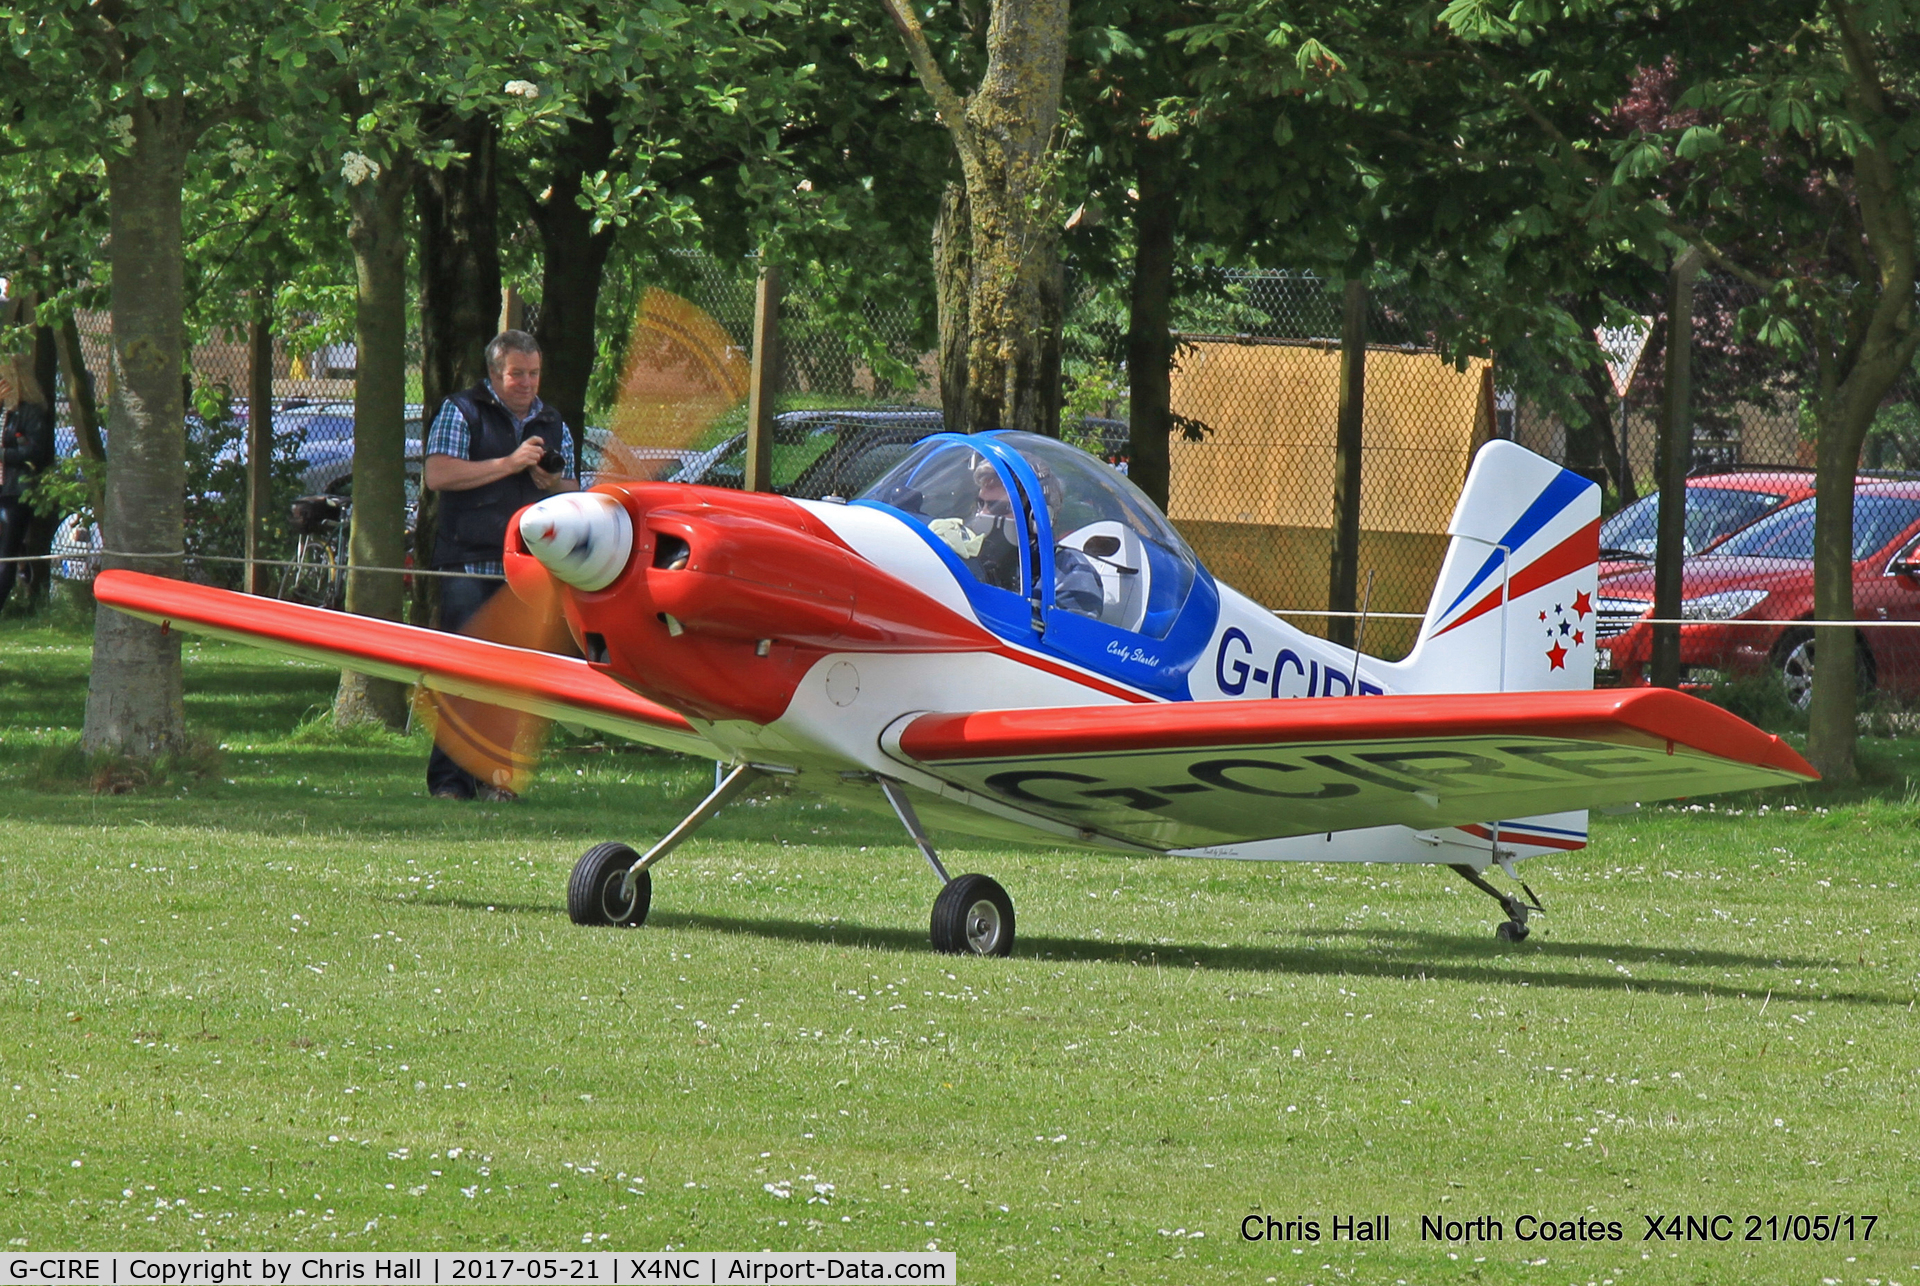 G-CIRE, 2015 Corby CJ-1 Starlet C/N LAA 134-14806, North Coates Summer fly in